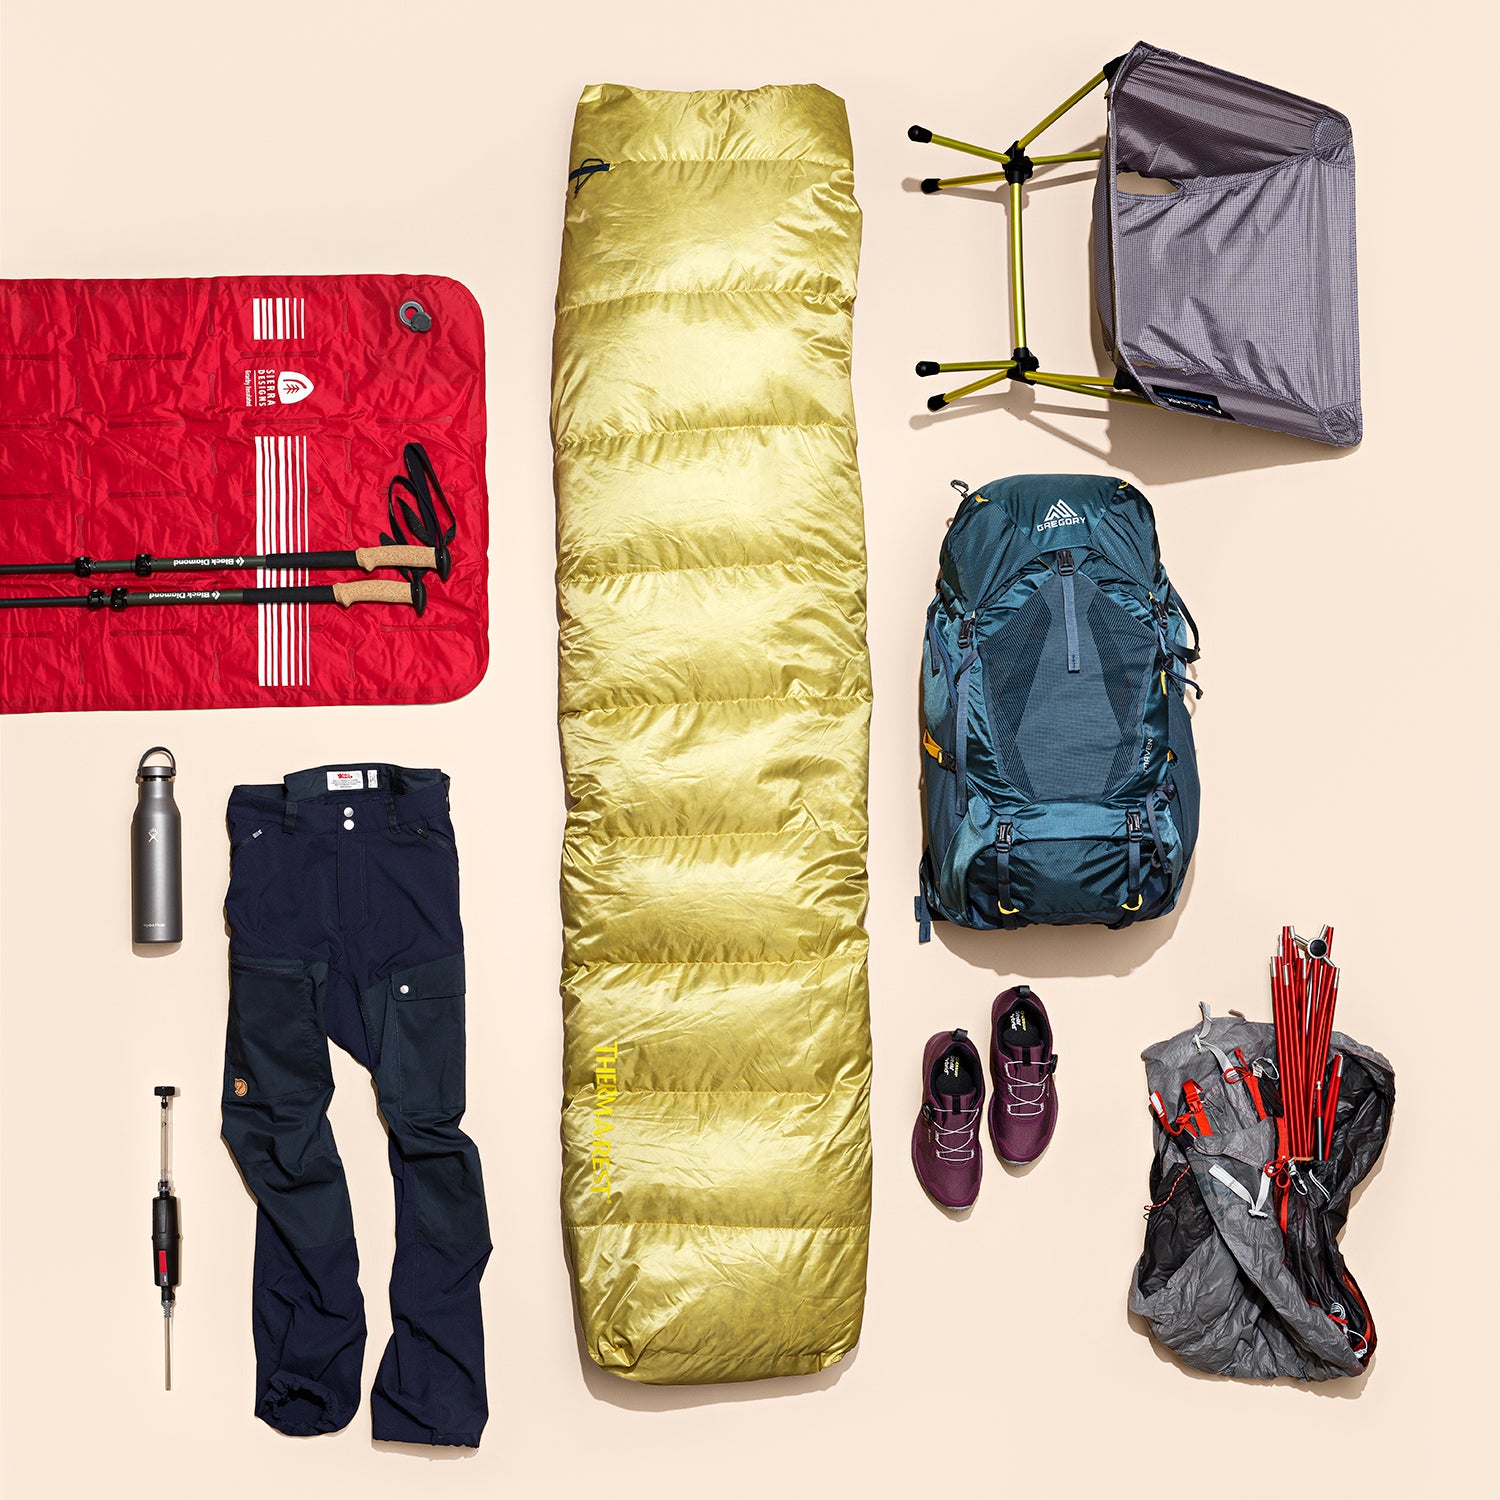 Innovative Hiking Gear to Enhance Your Outdoor Experience